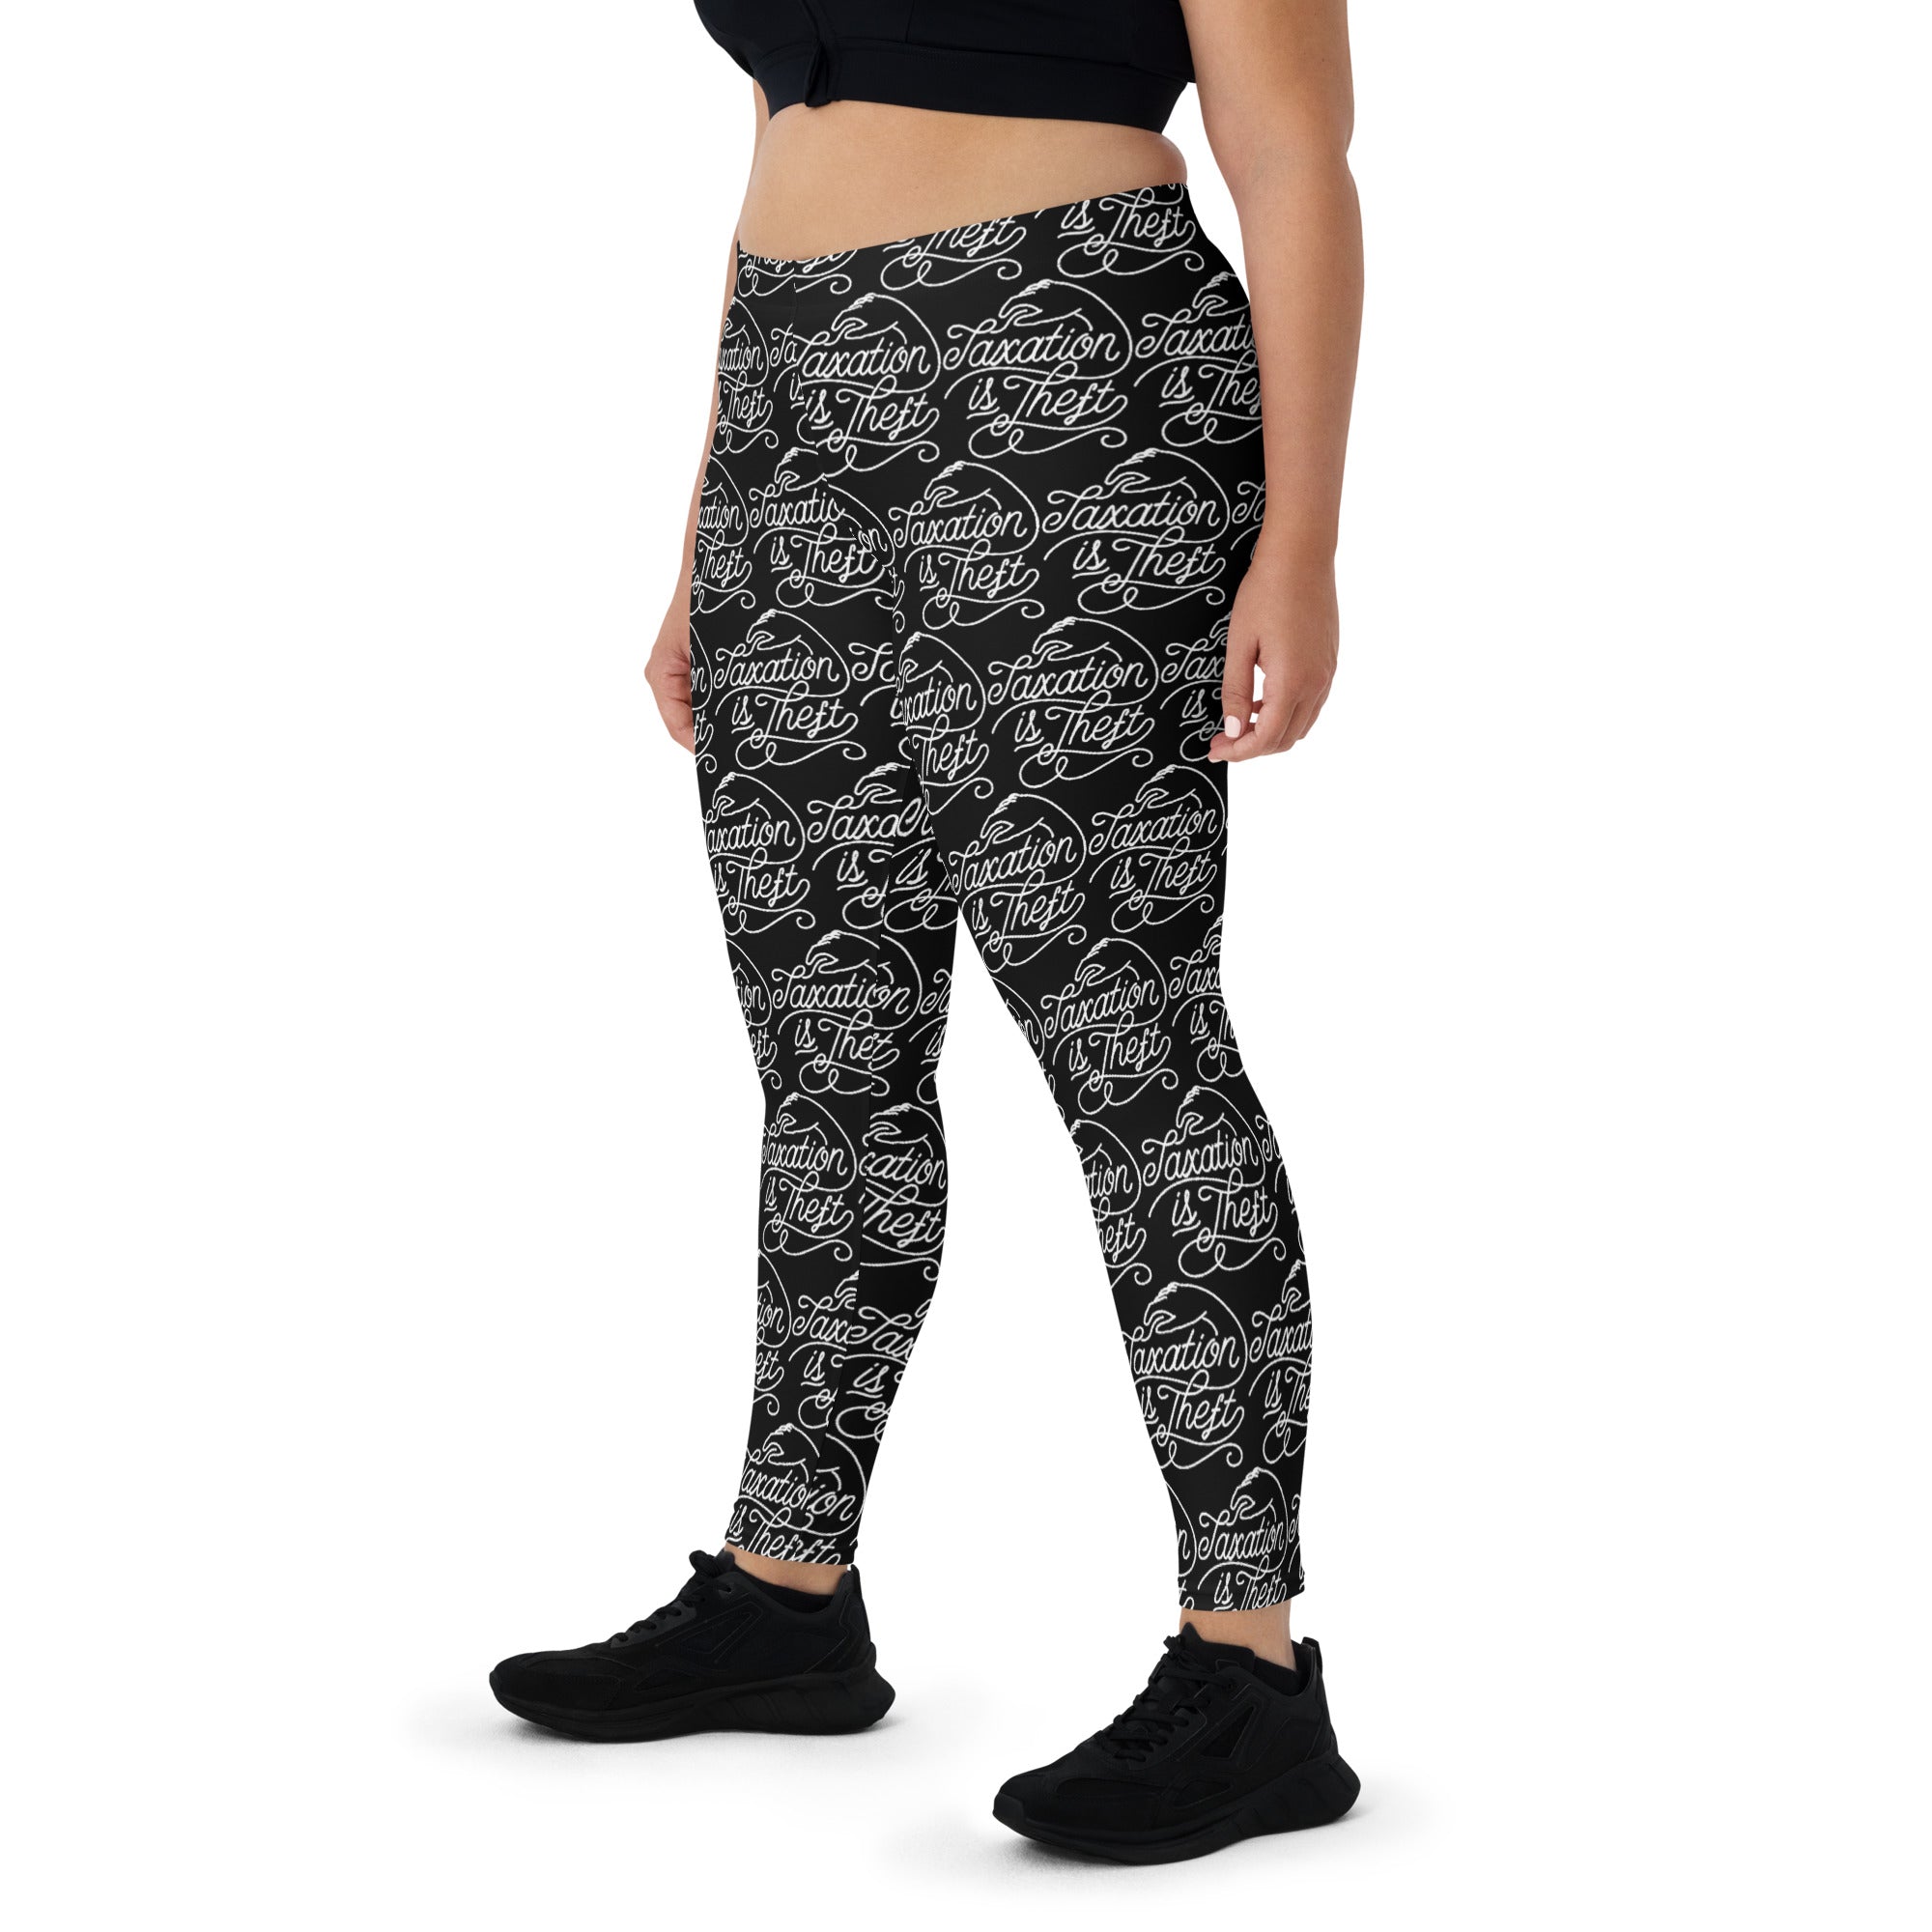 Taxation is Theft Grey Leggings